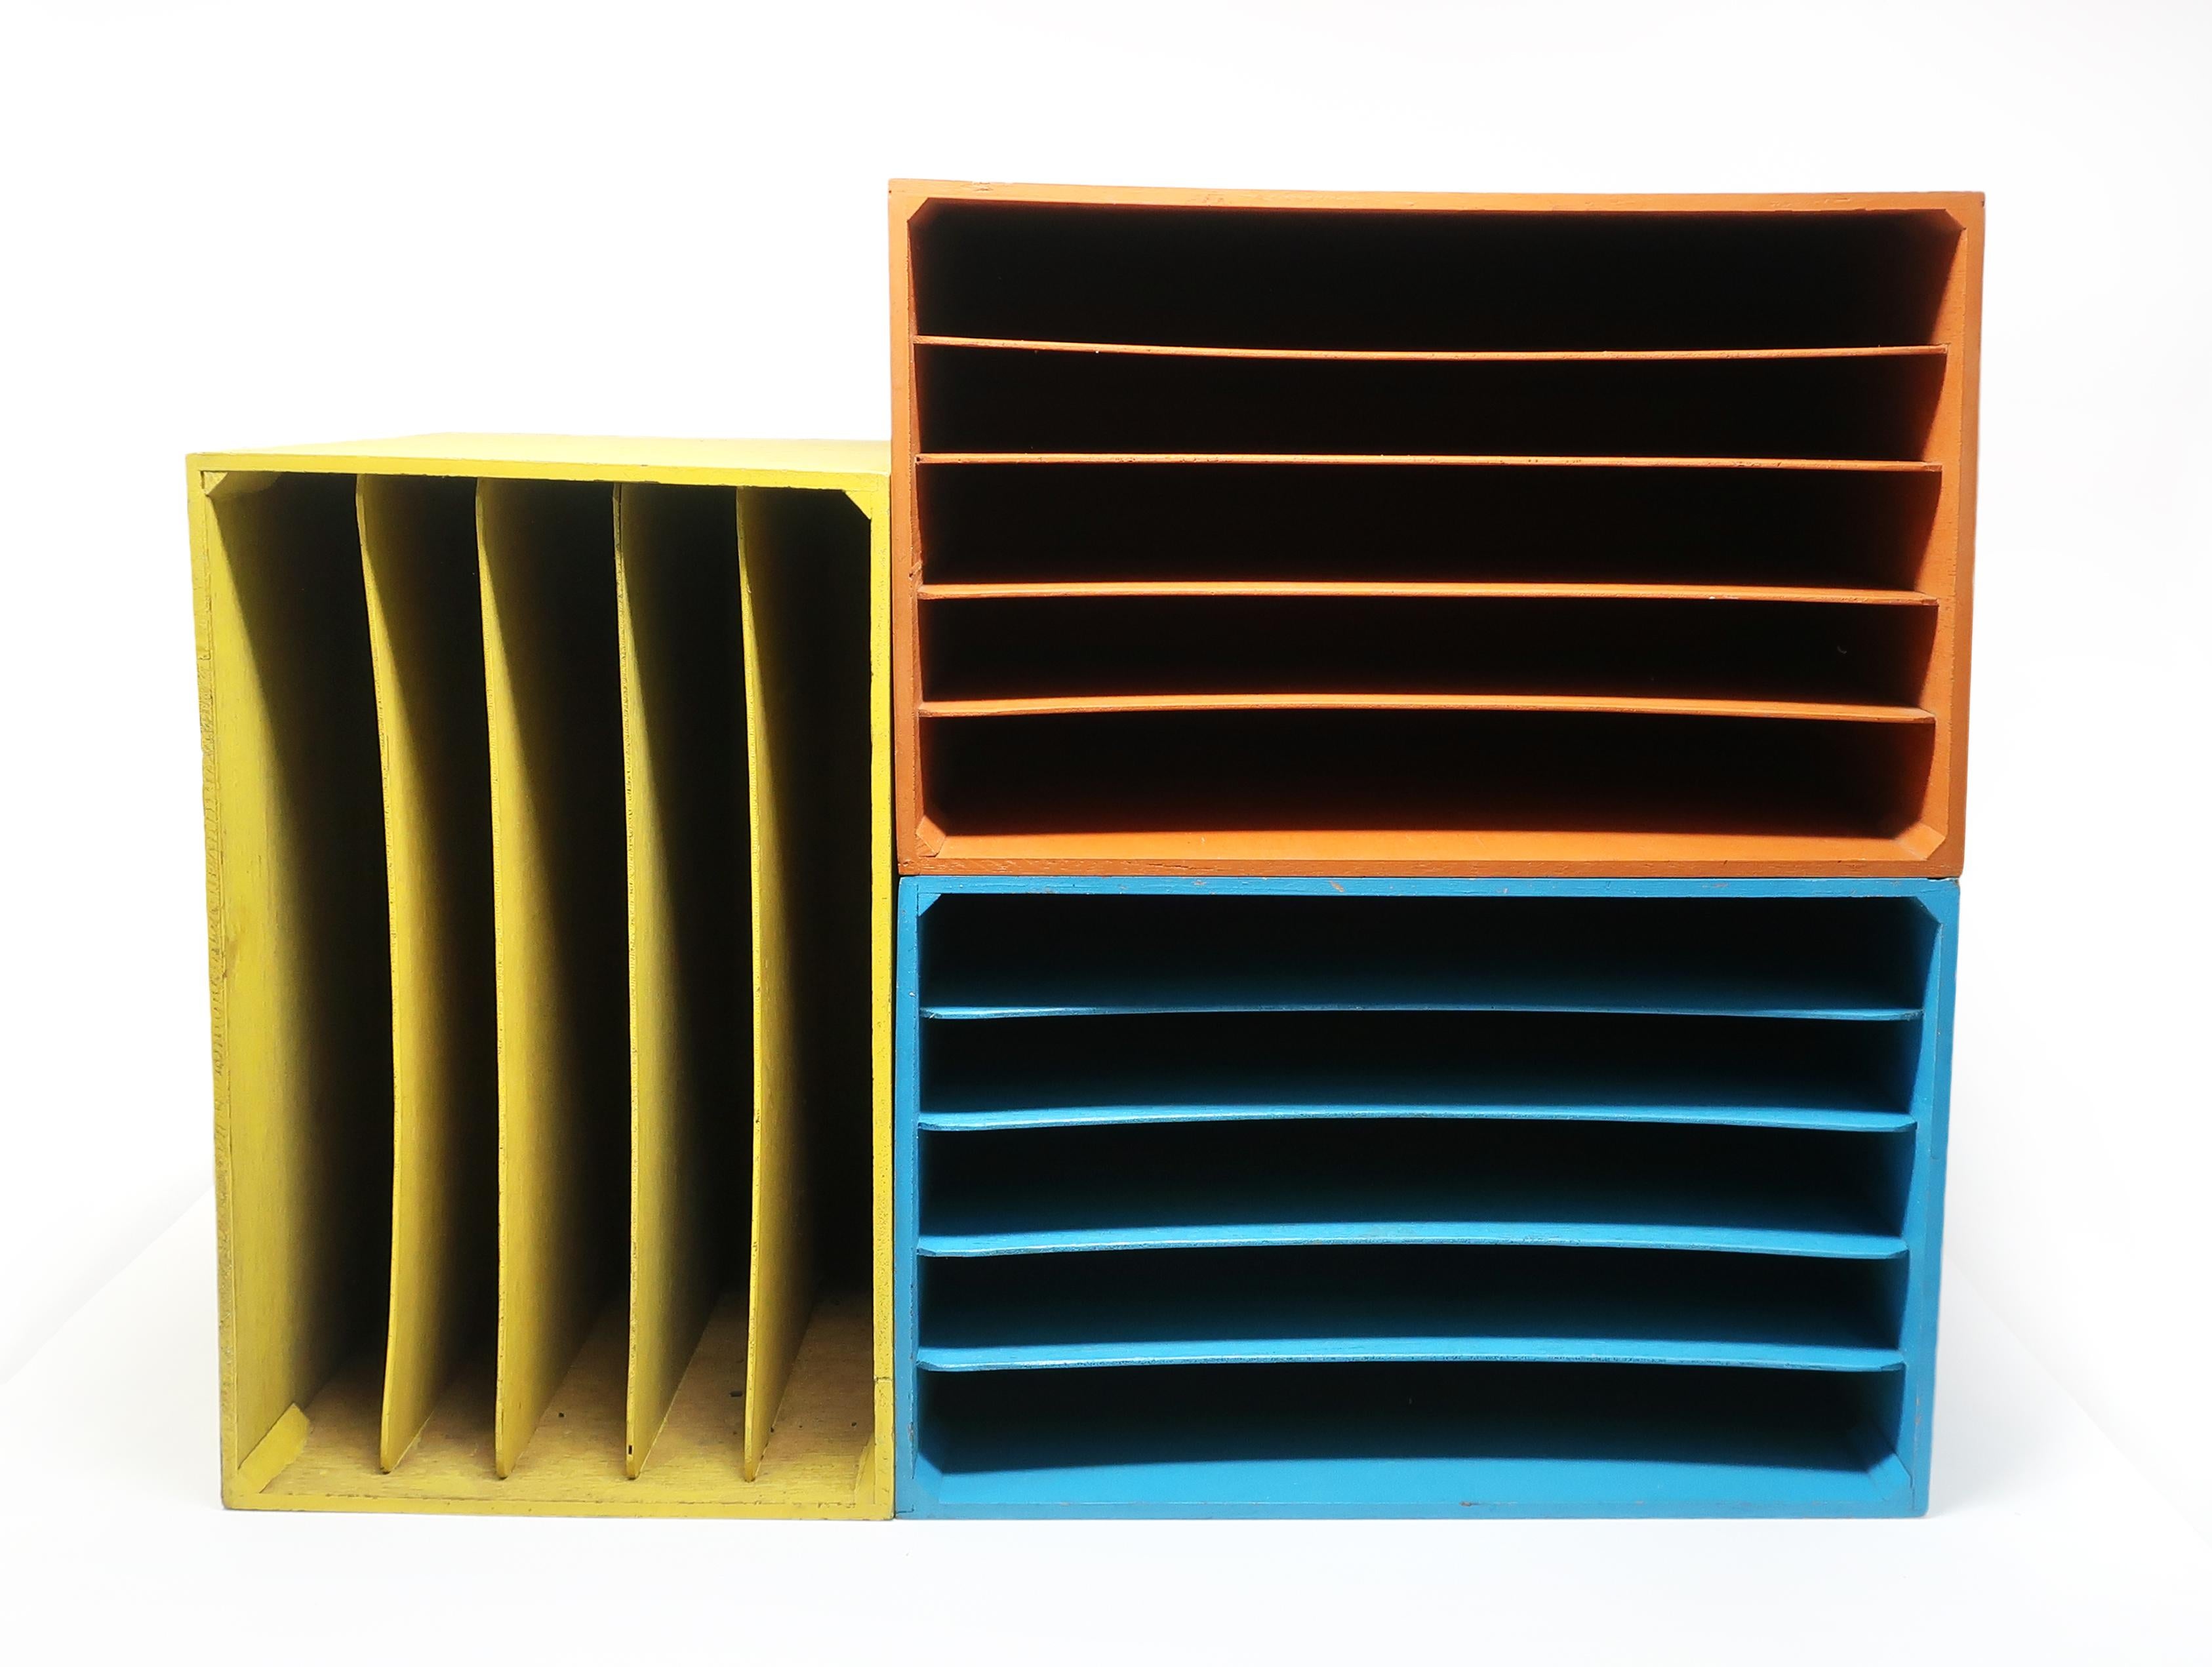 A set of three painted wooden boxes with divided slots in blue, yellow and orange. Can be used separately, set side by side, or stacked on top of each other. Perfect for storing vinyl records or magazines, or can be used to organize papers or files.